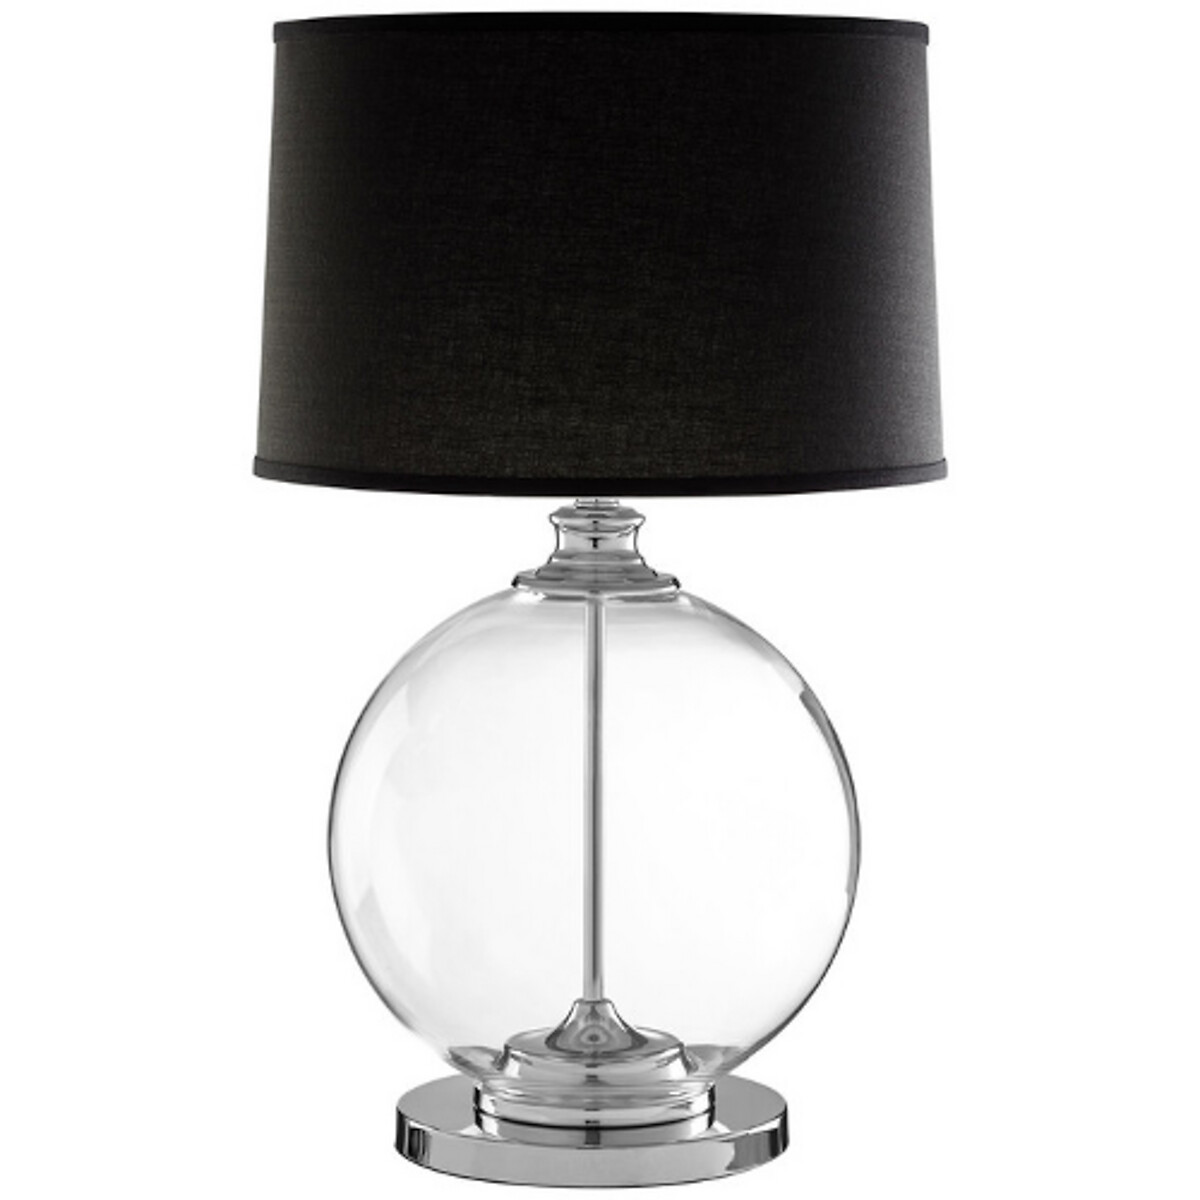 Medium Glass Orb With Linen Shade Table, Glass Light Shades For Table Lamps